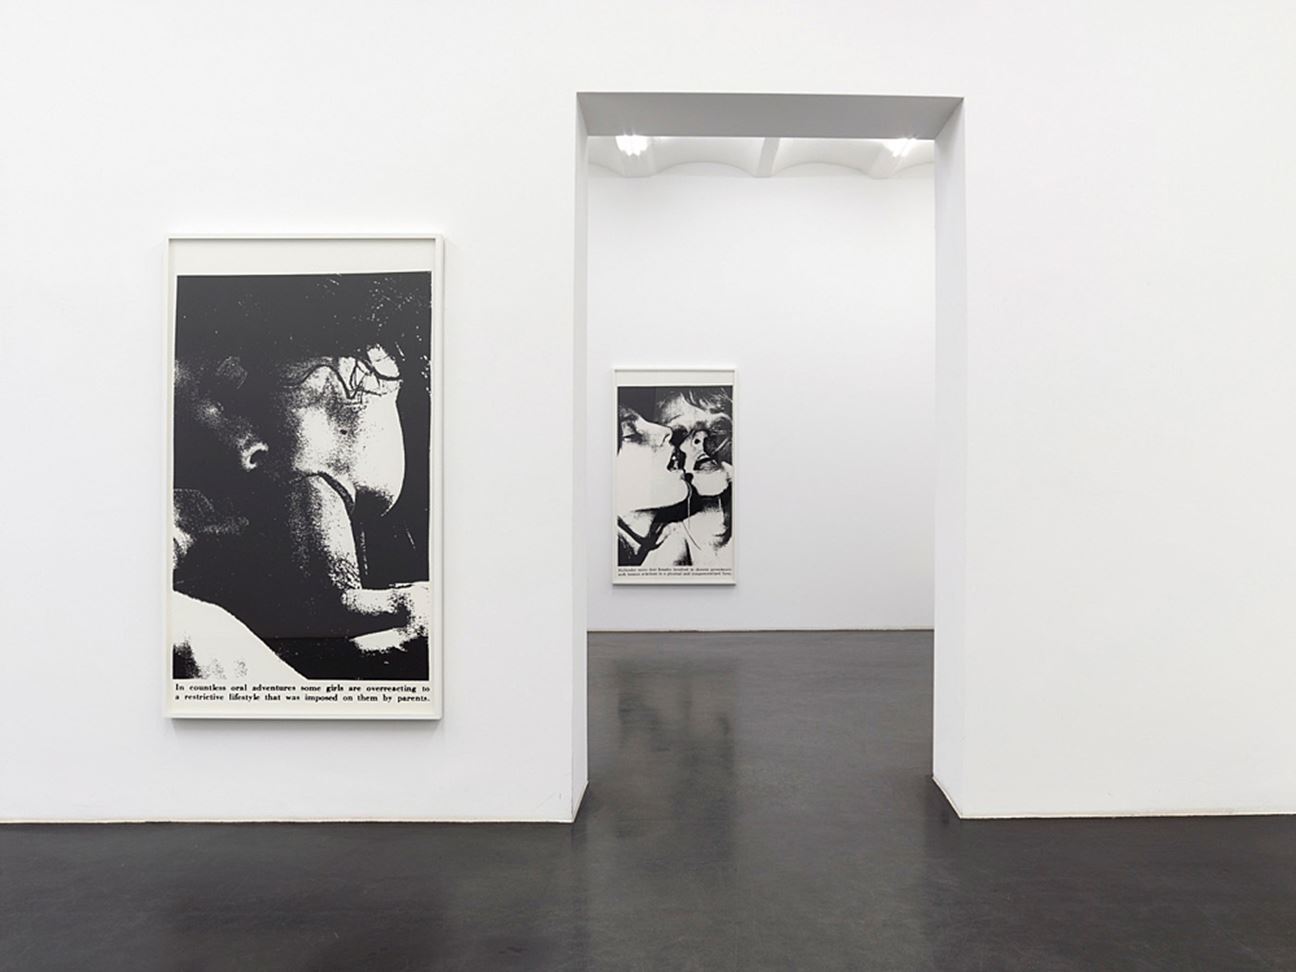 Lutz Bacher, Sex with Strangers, 1986 at Galerie Buchholz, Cologne, Germany on 9 Apr–31 May 2014 Ocula pic photo